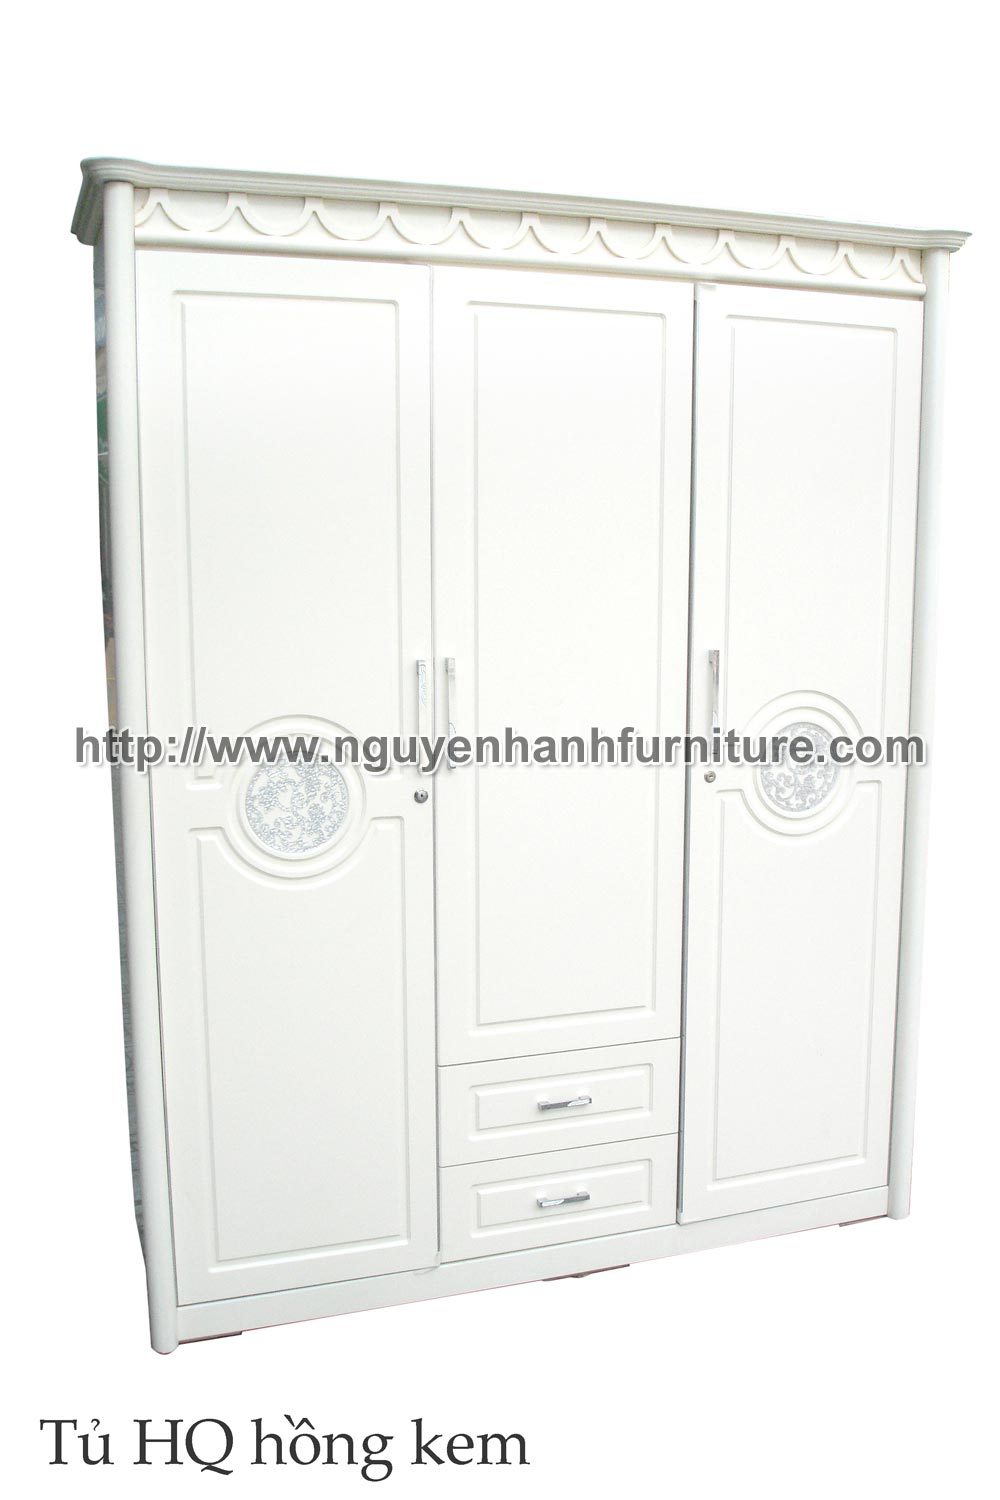 Name product: South Korean style Pinky cabinet - Dimensions: 60 x 160 x 210cm - Description: MDF 